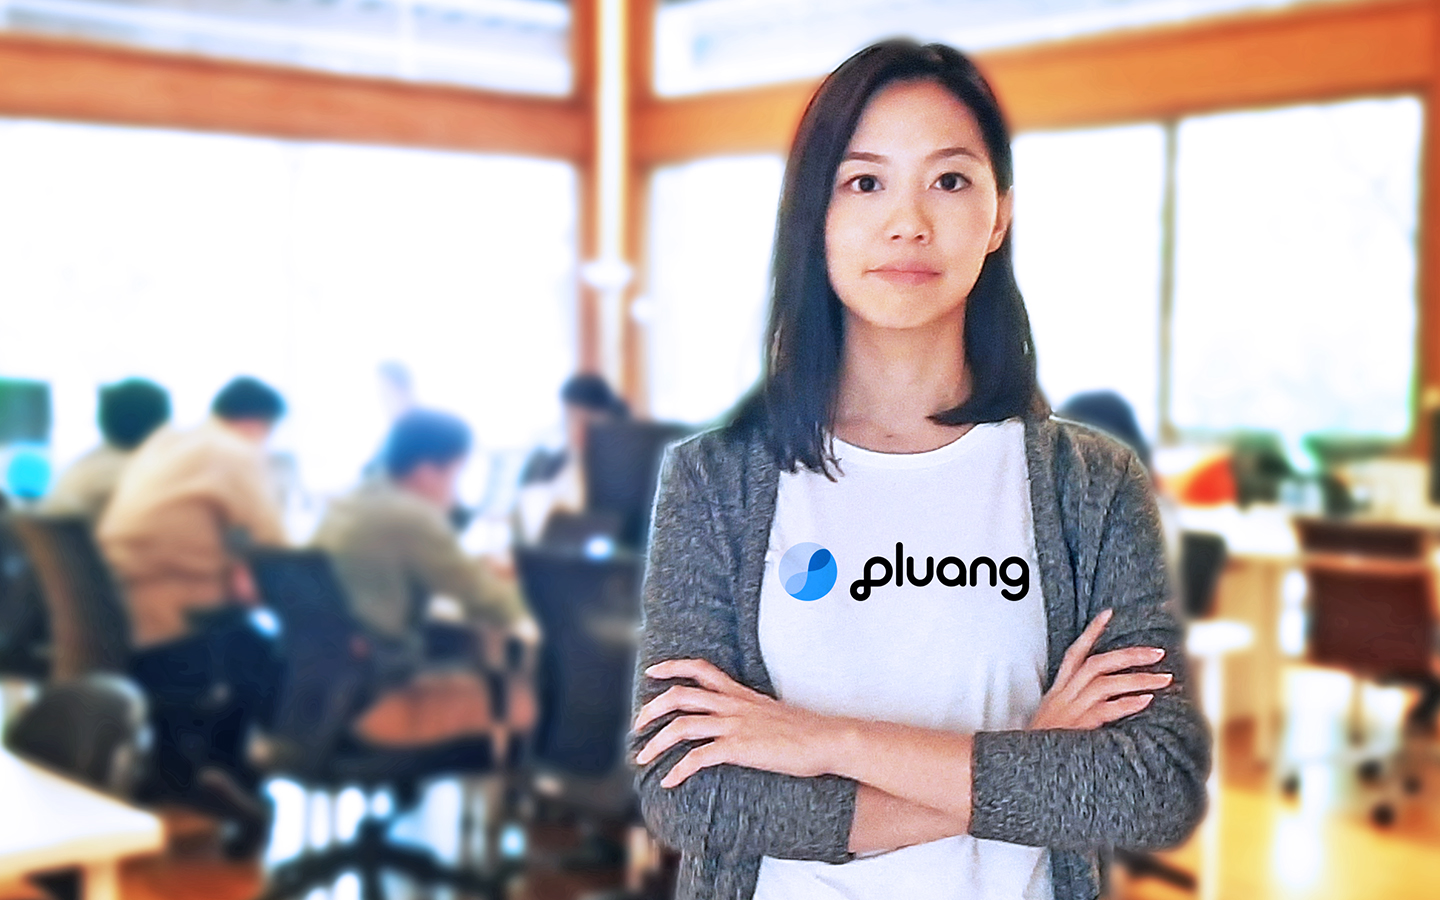 Indonesian savings app Pluang bags new funding amid investment boom in the country